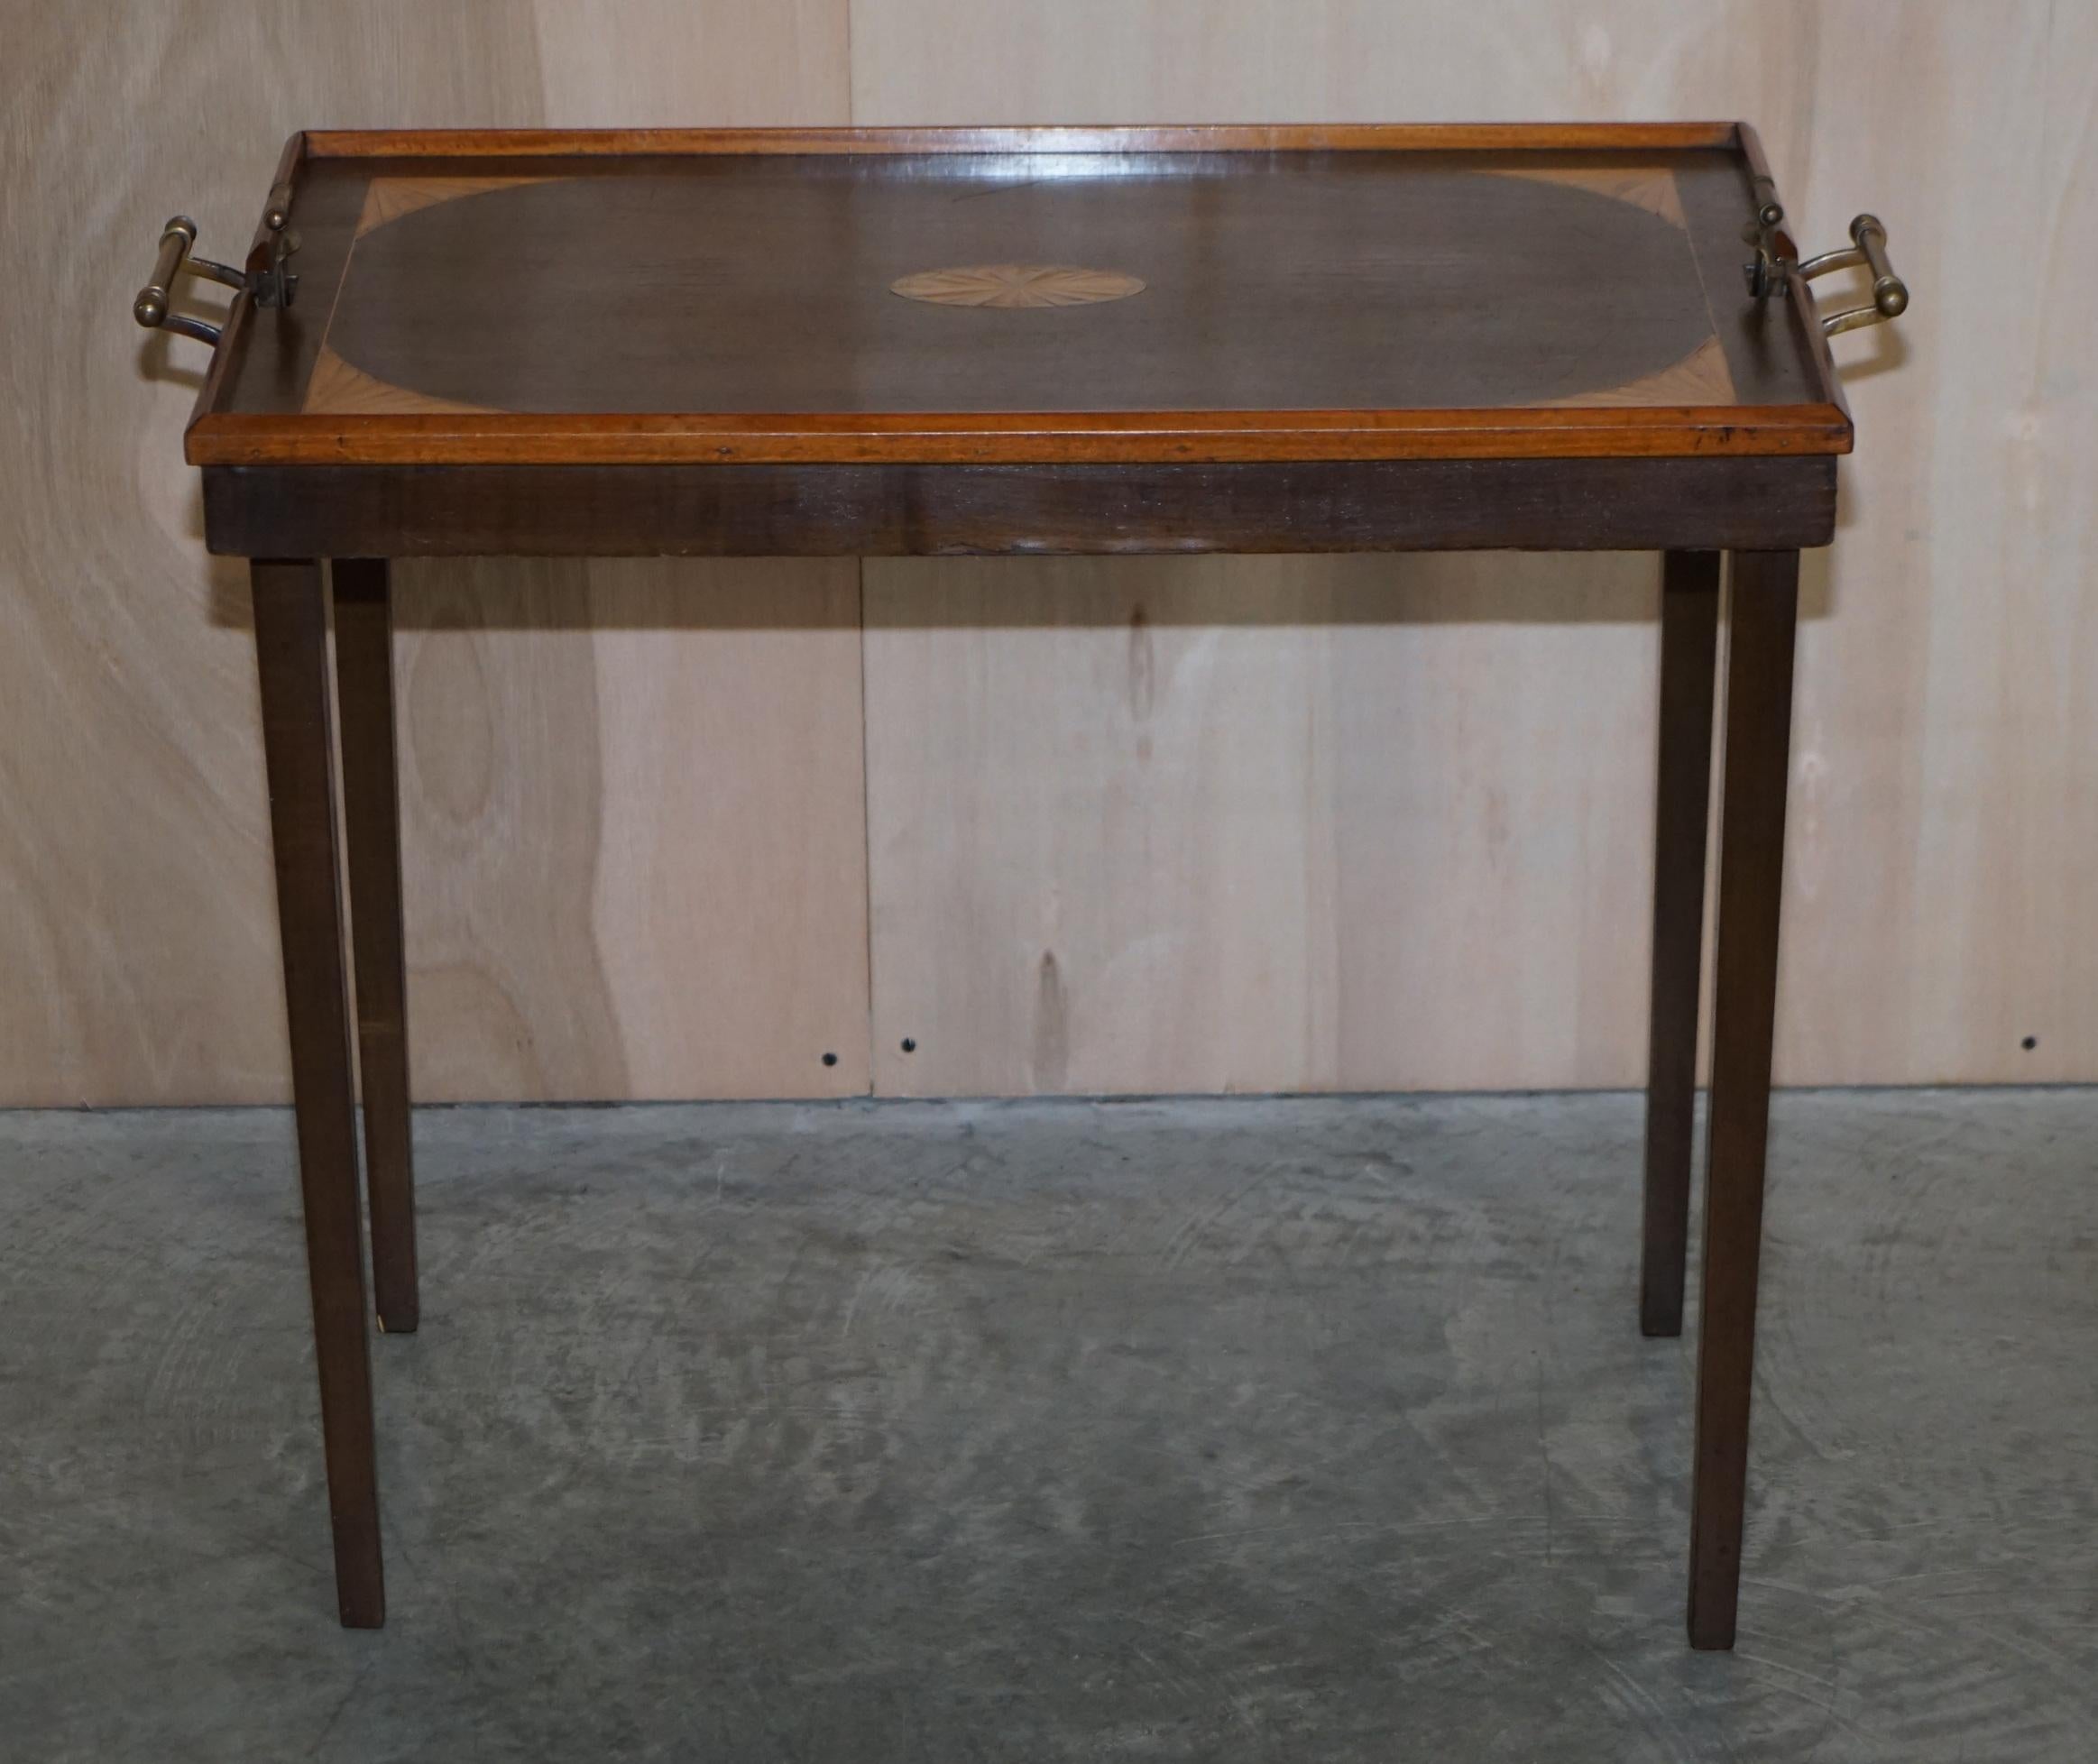 We are delighted to offer for sale this extremely well made, antique Victorian, Sheraton Revival folding butlers tray table

A very good looking well made and decorative piece, it’s the perfect side for home and picnic use, its wonderfully over